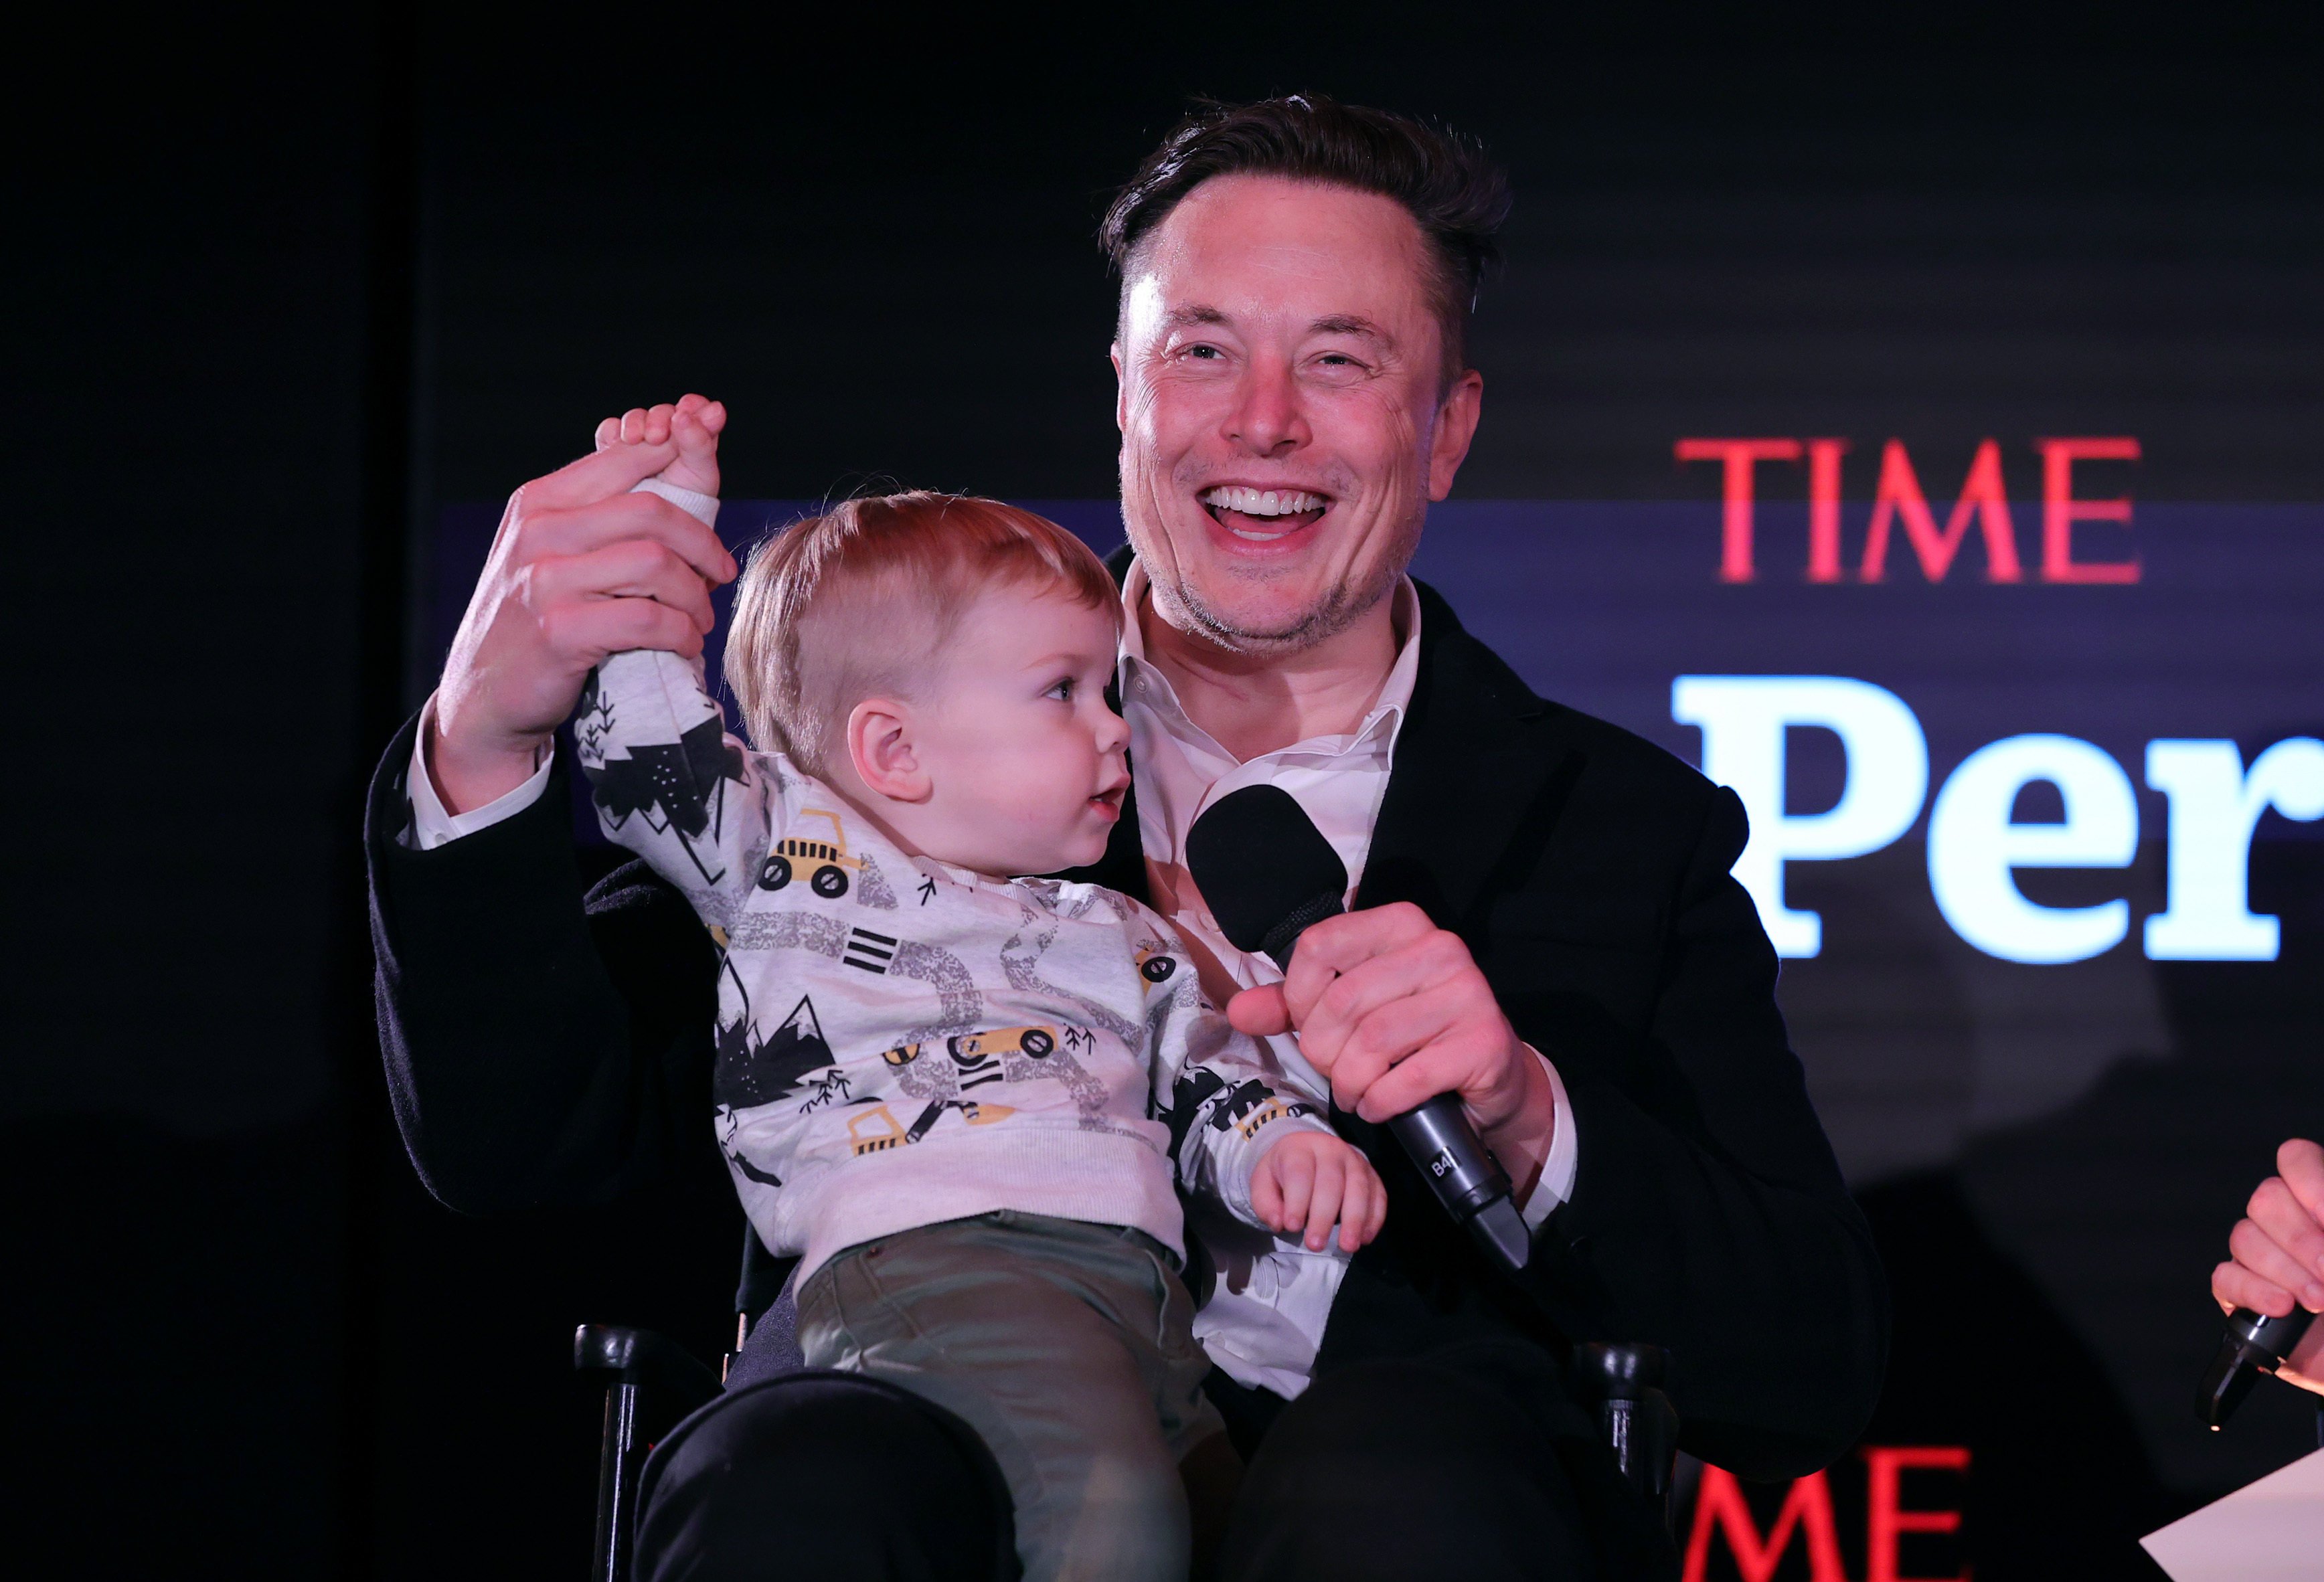 Elon Musk and son X Æ A-12, pictured on stage at the Time Person of the Year event in December 2021, in New York City, appear to have a special bond. Photo: Getty Images